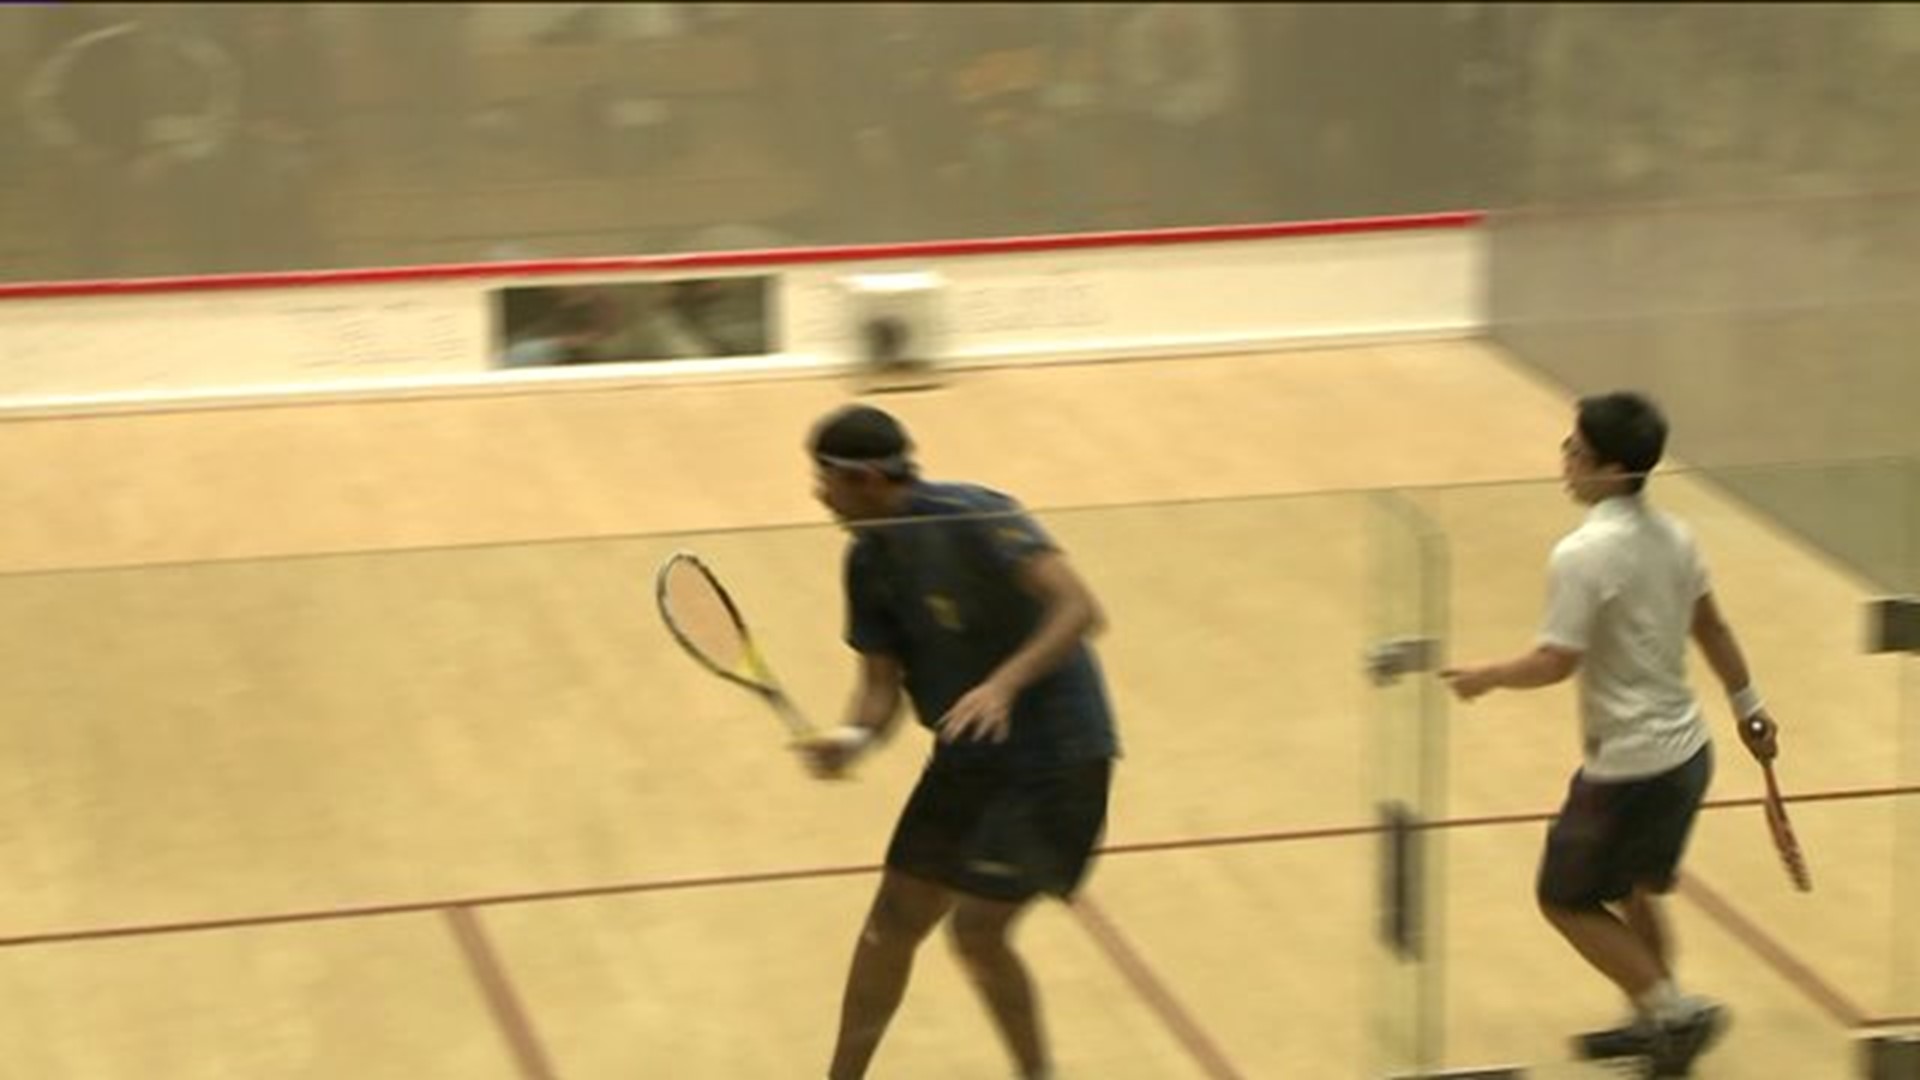 Local squash club for kids recognized nationally